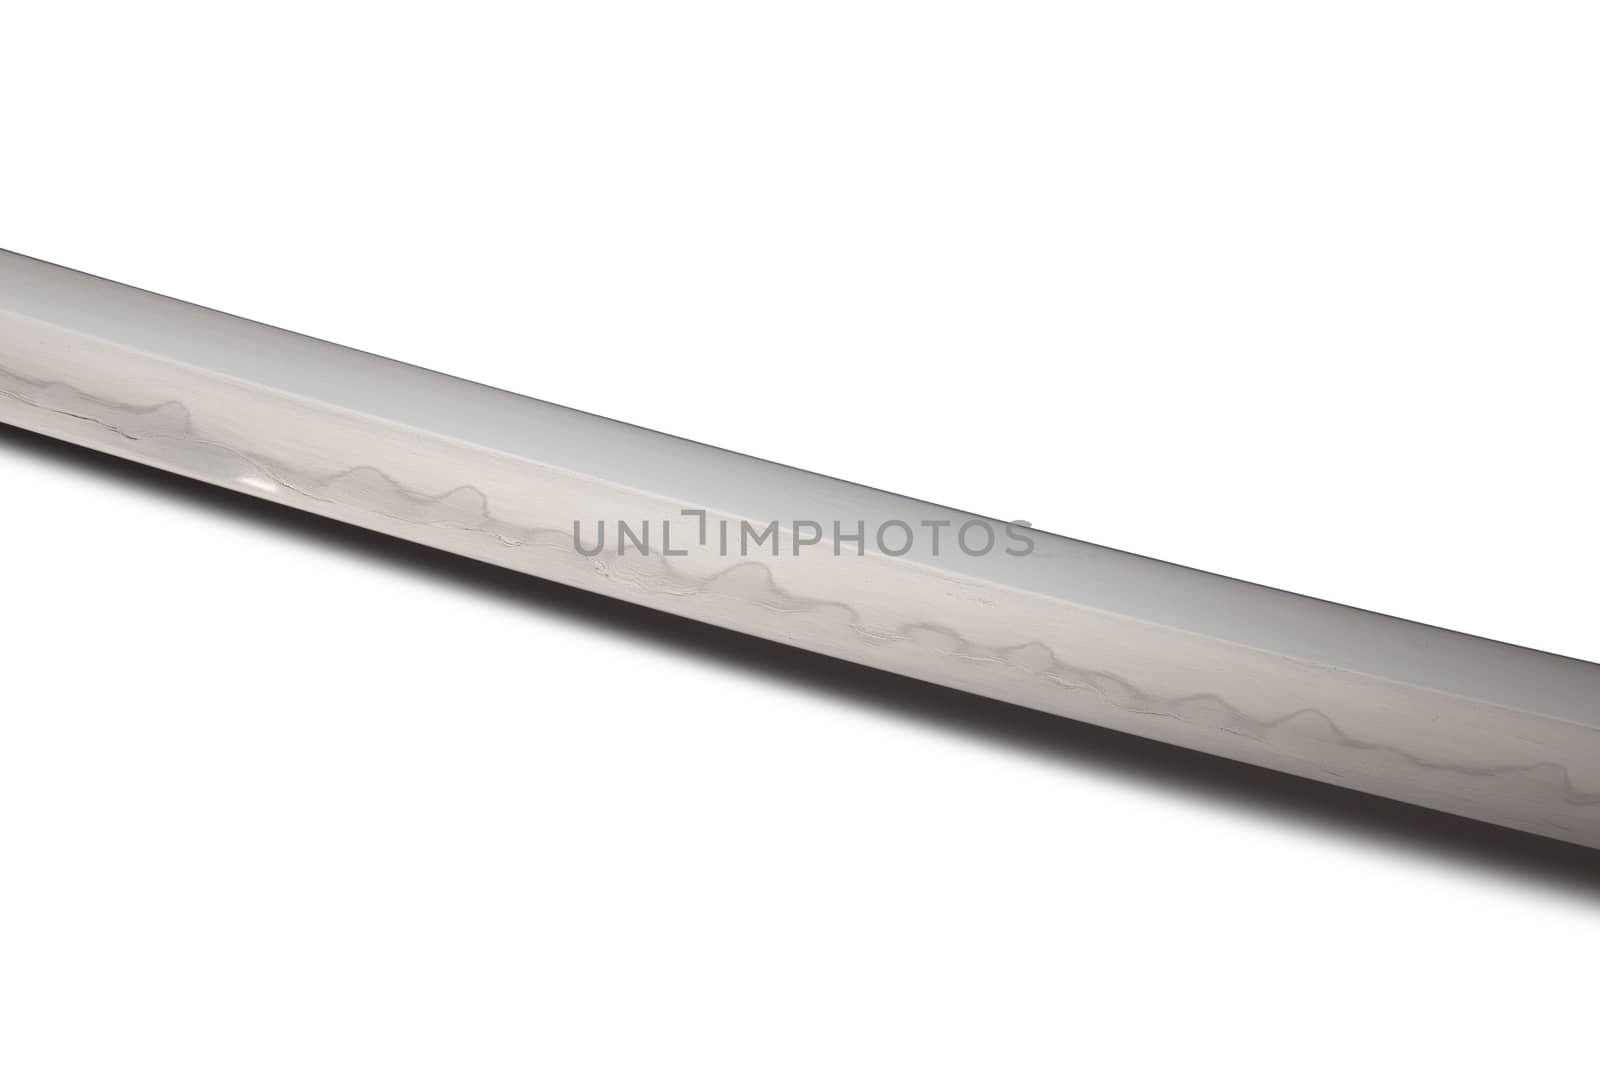 Japanese sword blade (made in China) on white background. Soft focus The blacksmith forged several folds until several layers were formed. Can be seen clearly on the surface.